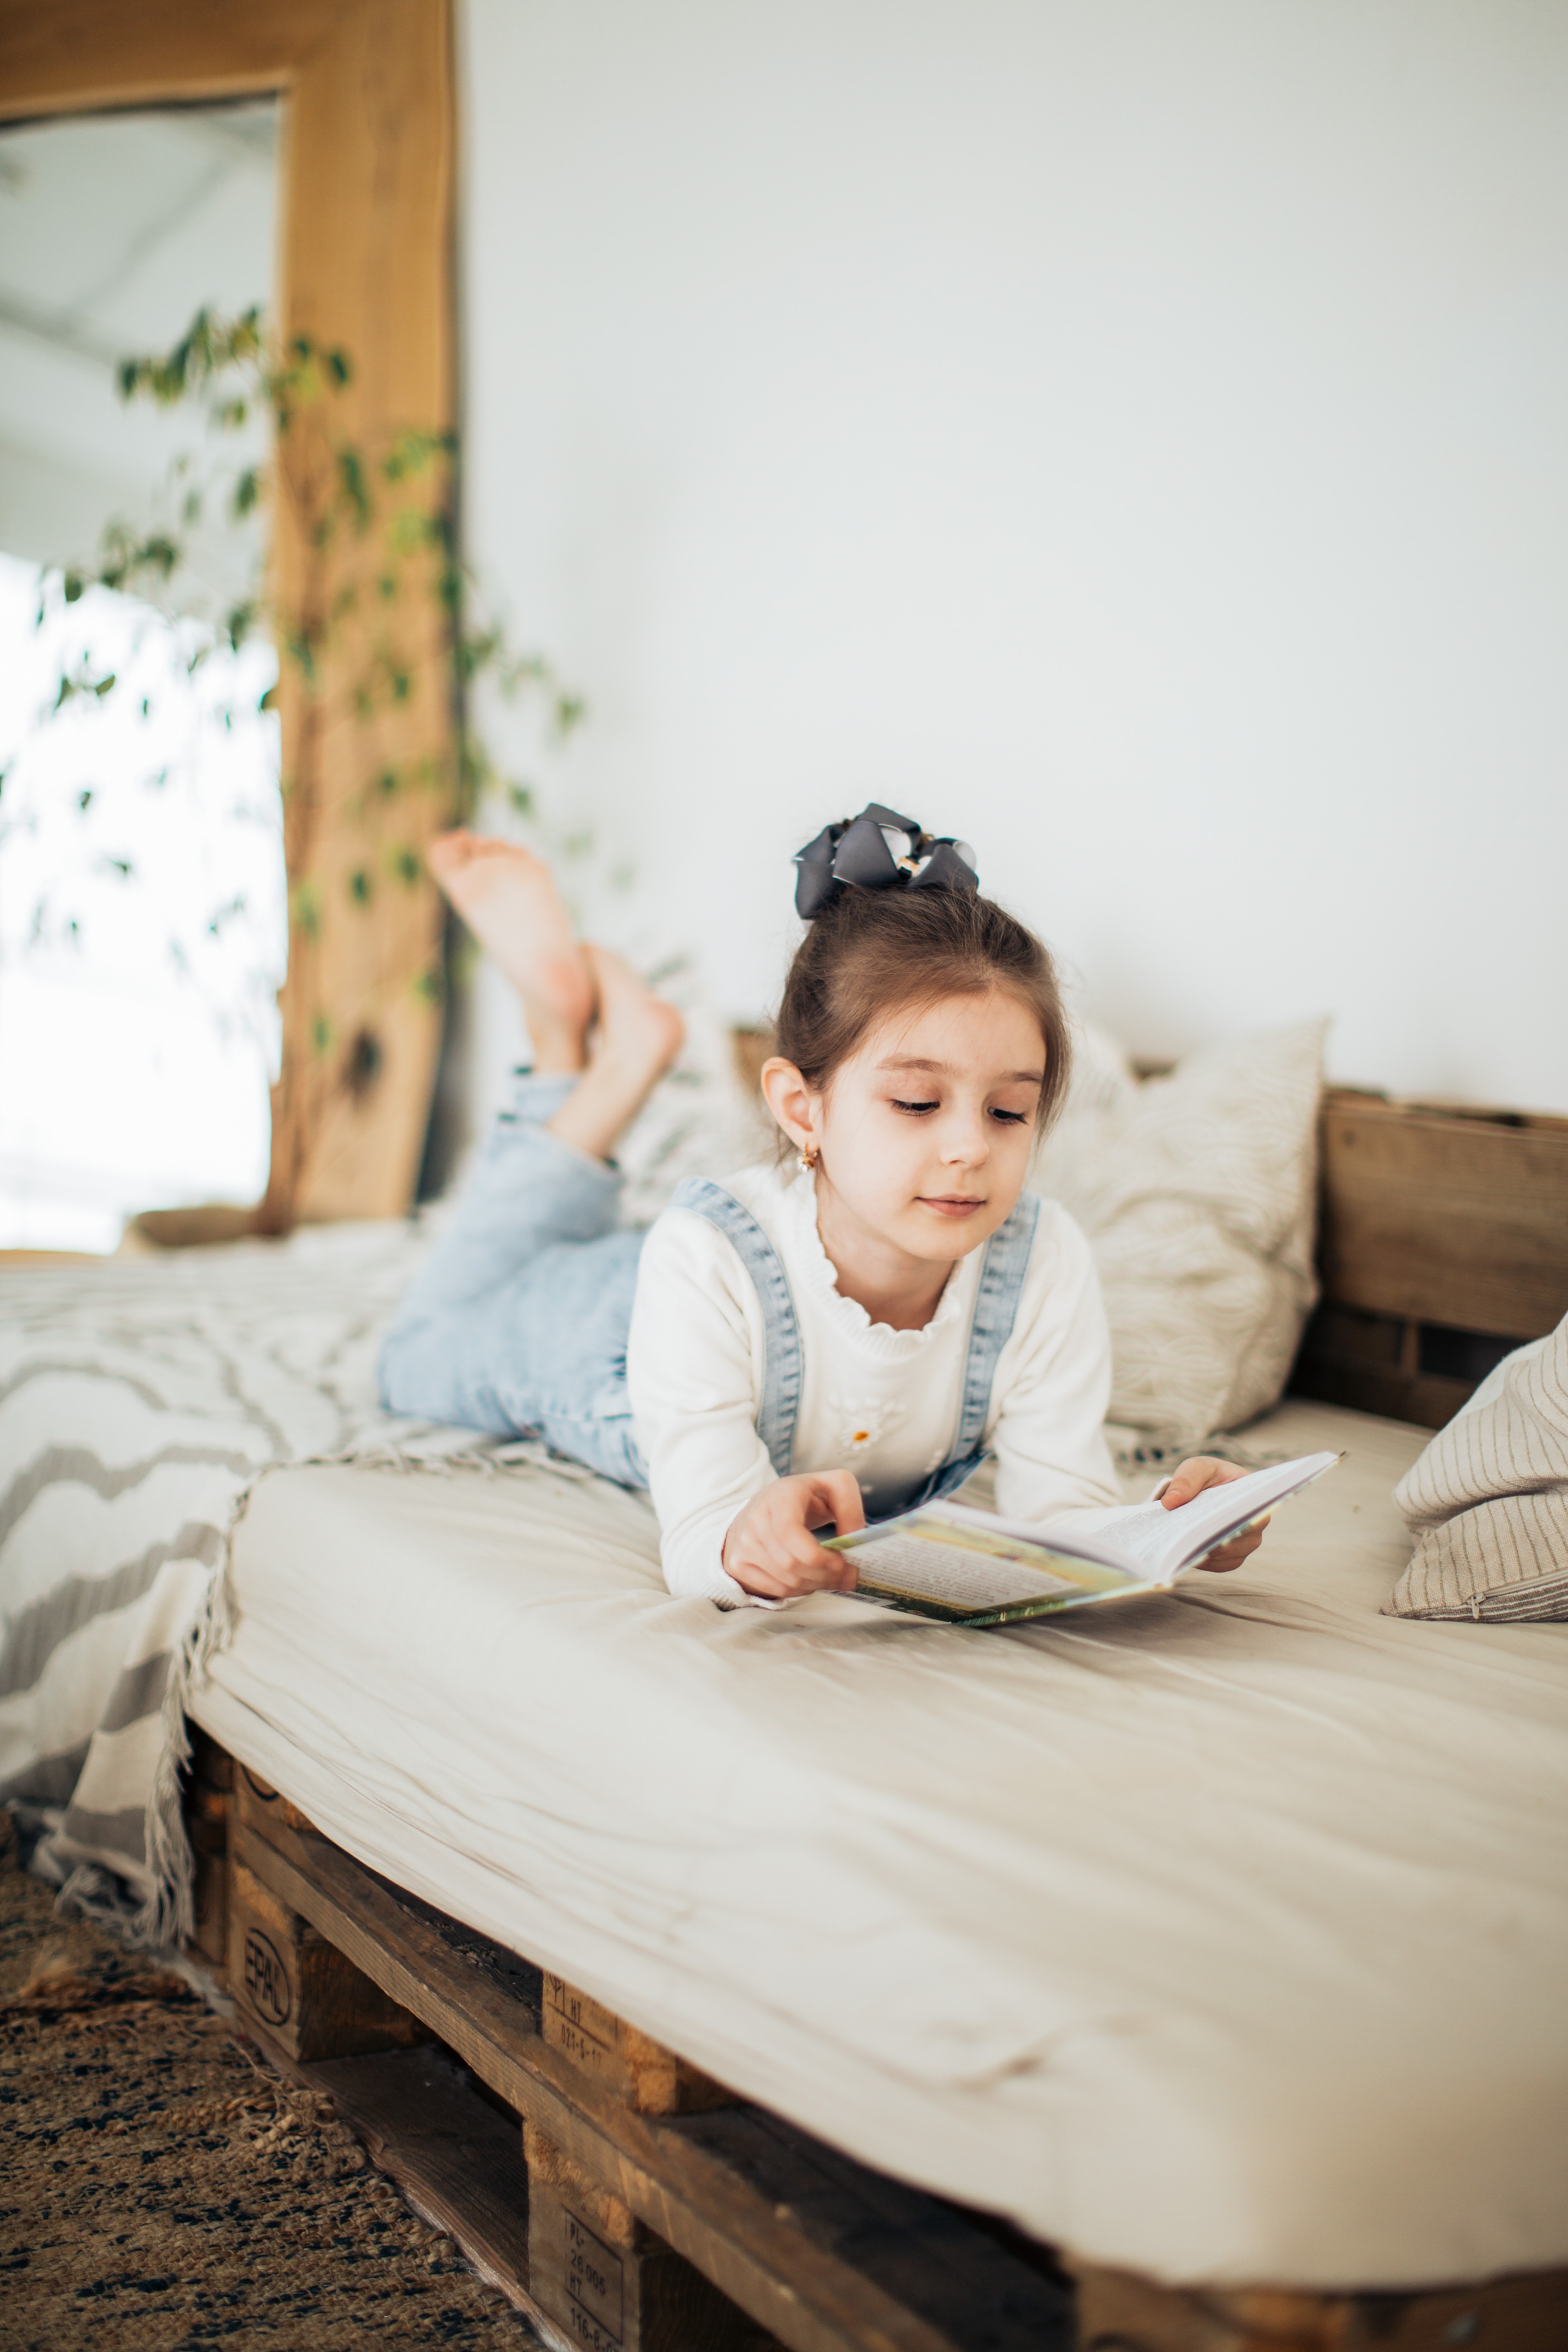 Photo by Elina Fairytale from Pexels
child reading, reading, bed